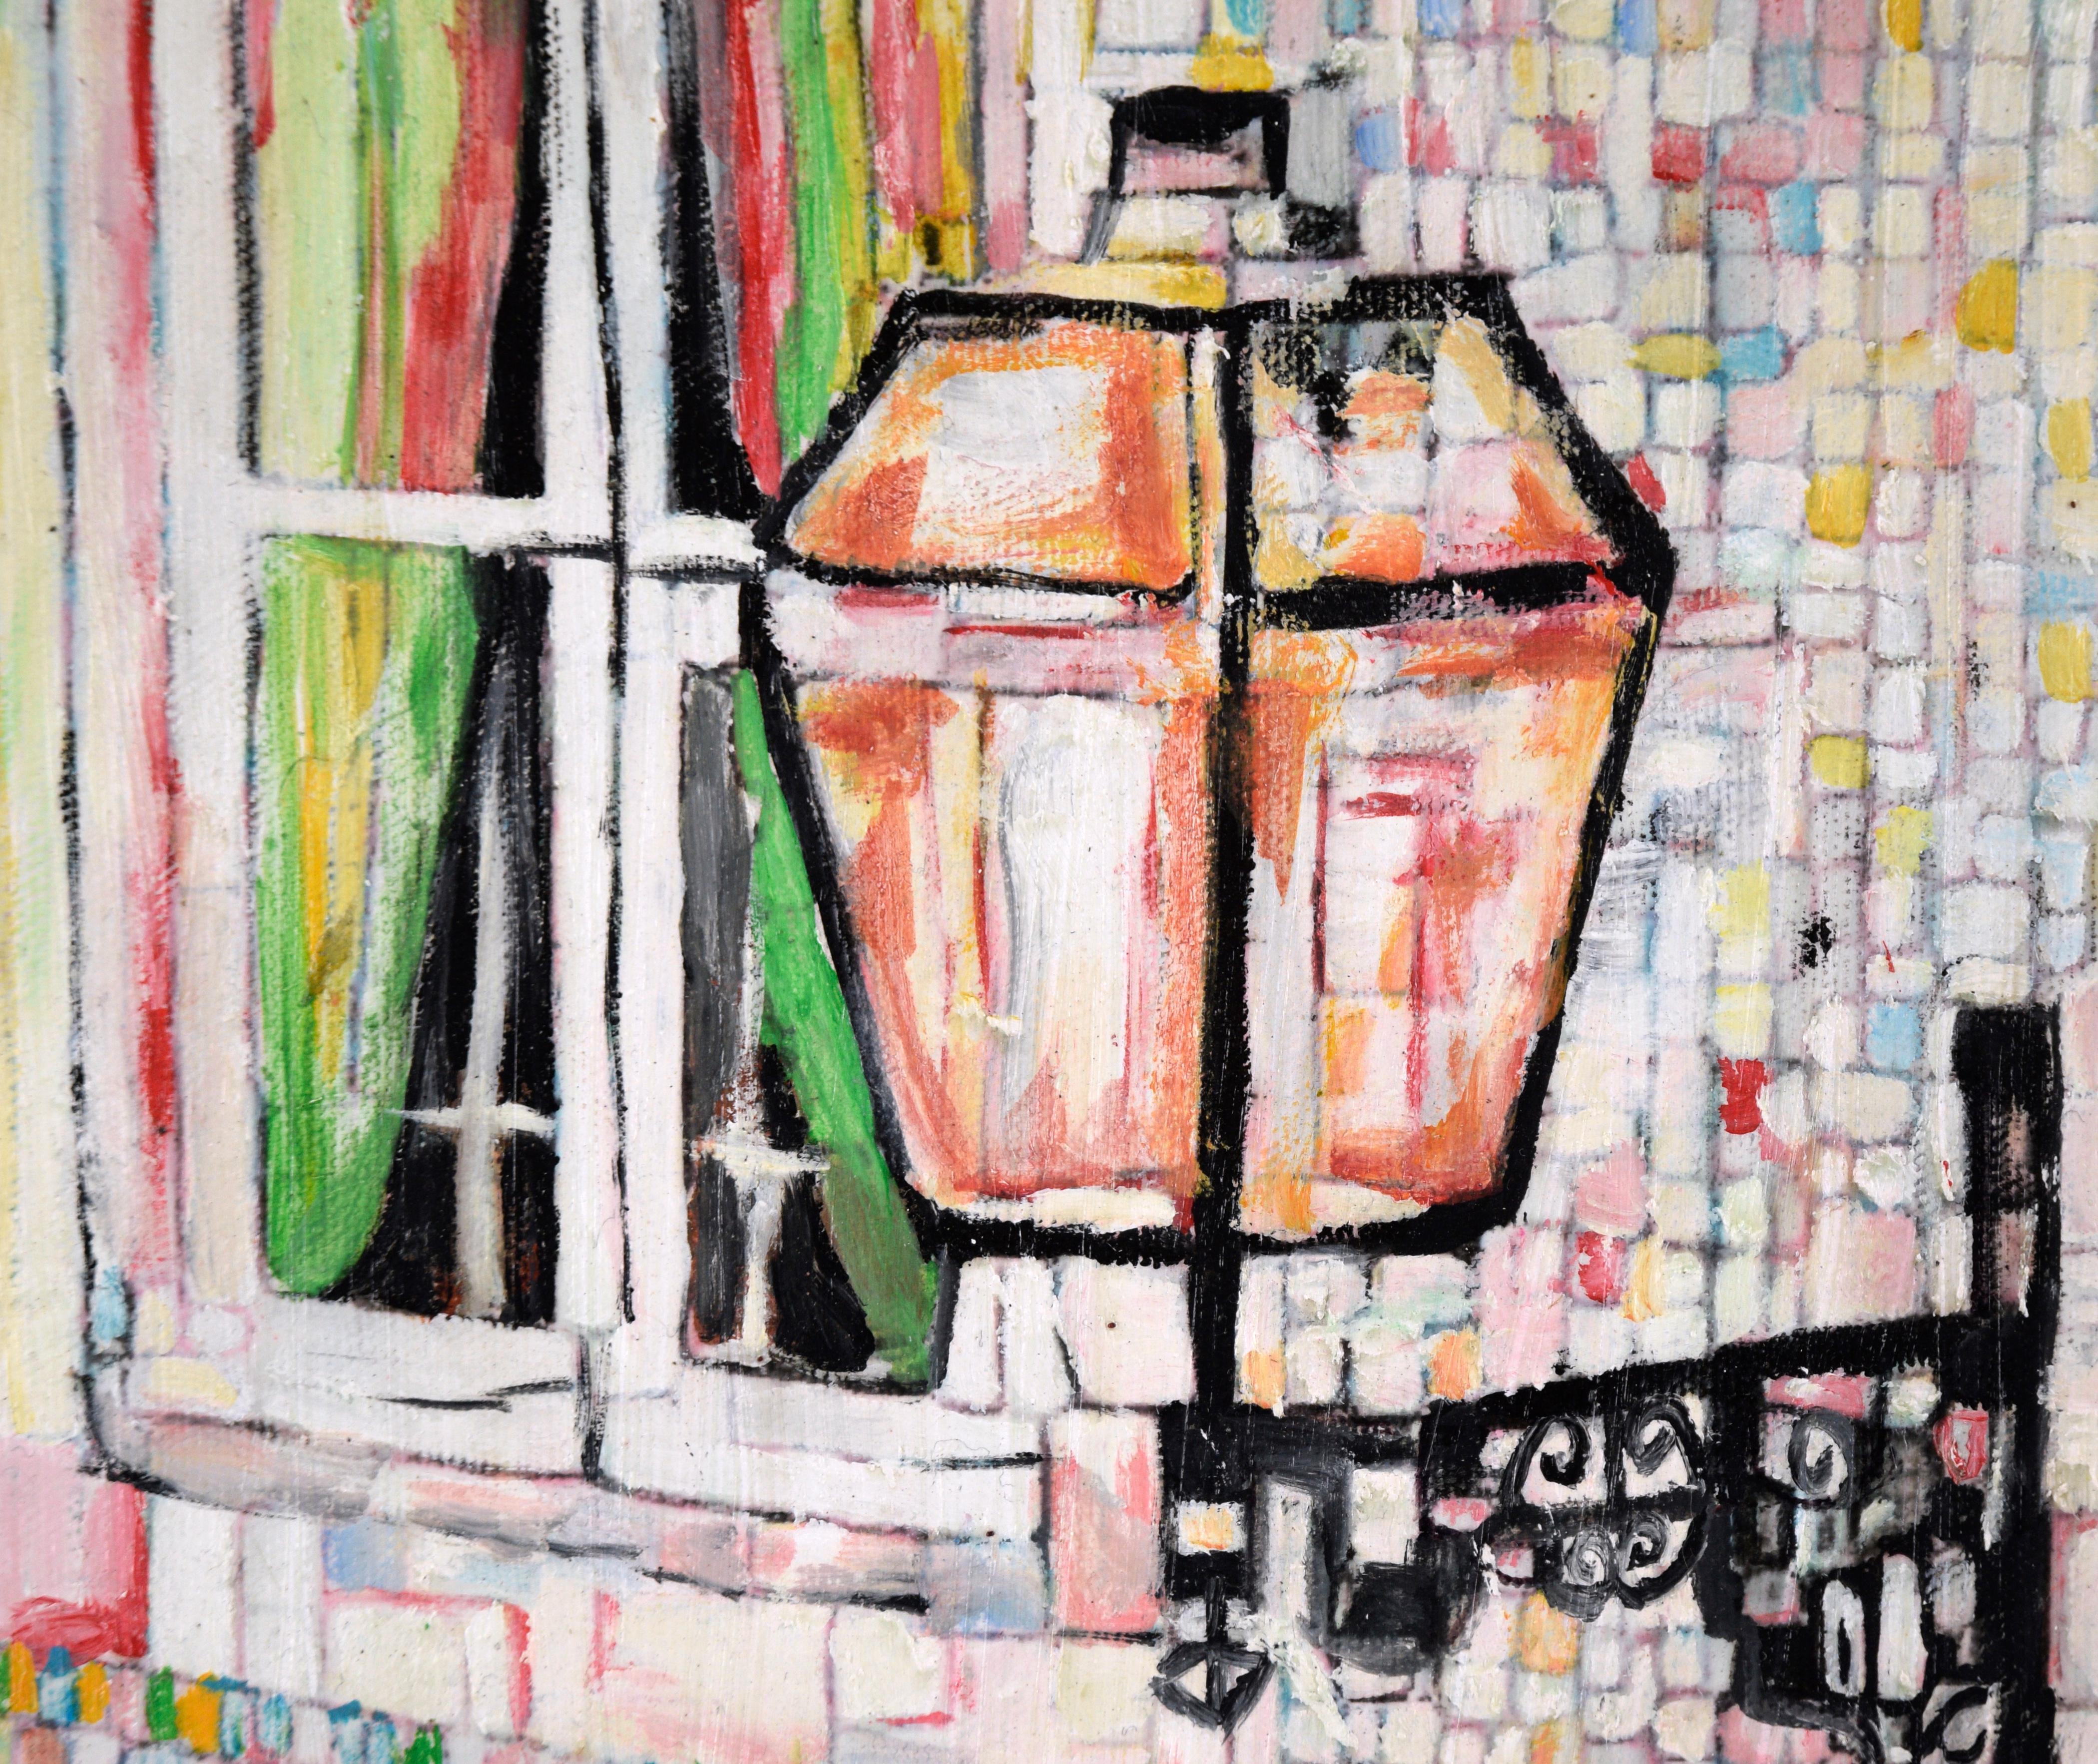 Portuguese Lamp and Window - Beige Abstract Painting by Ana Doolin